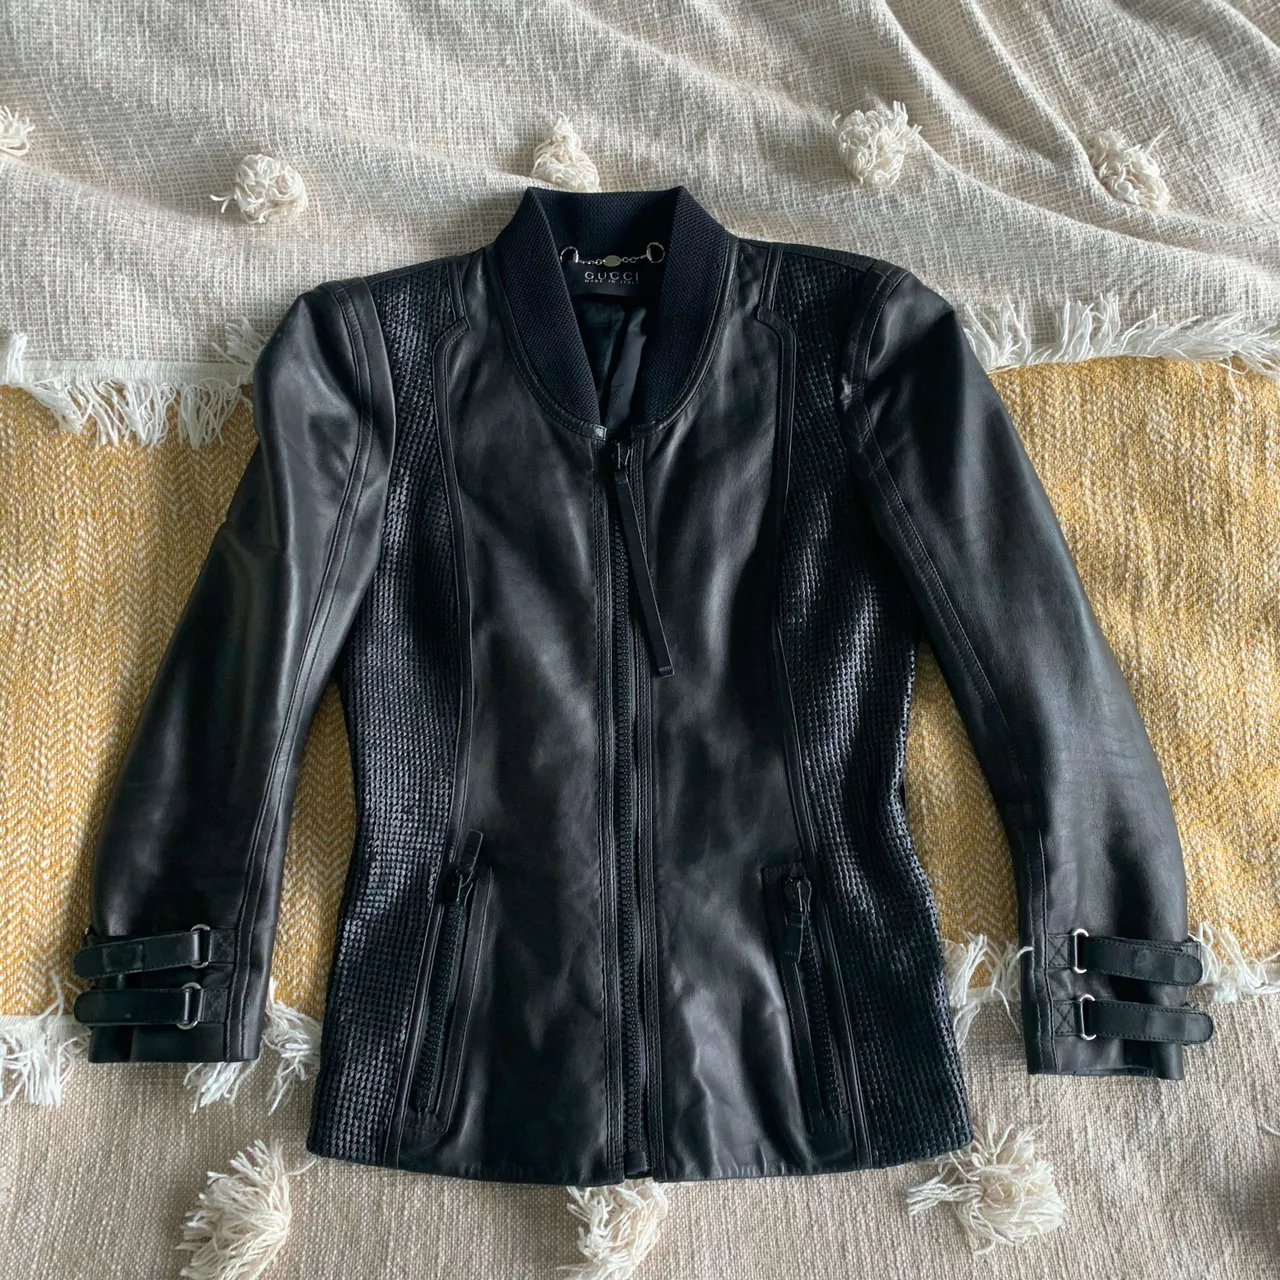 Authentic Gucci Leather Jacket photo 6